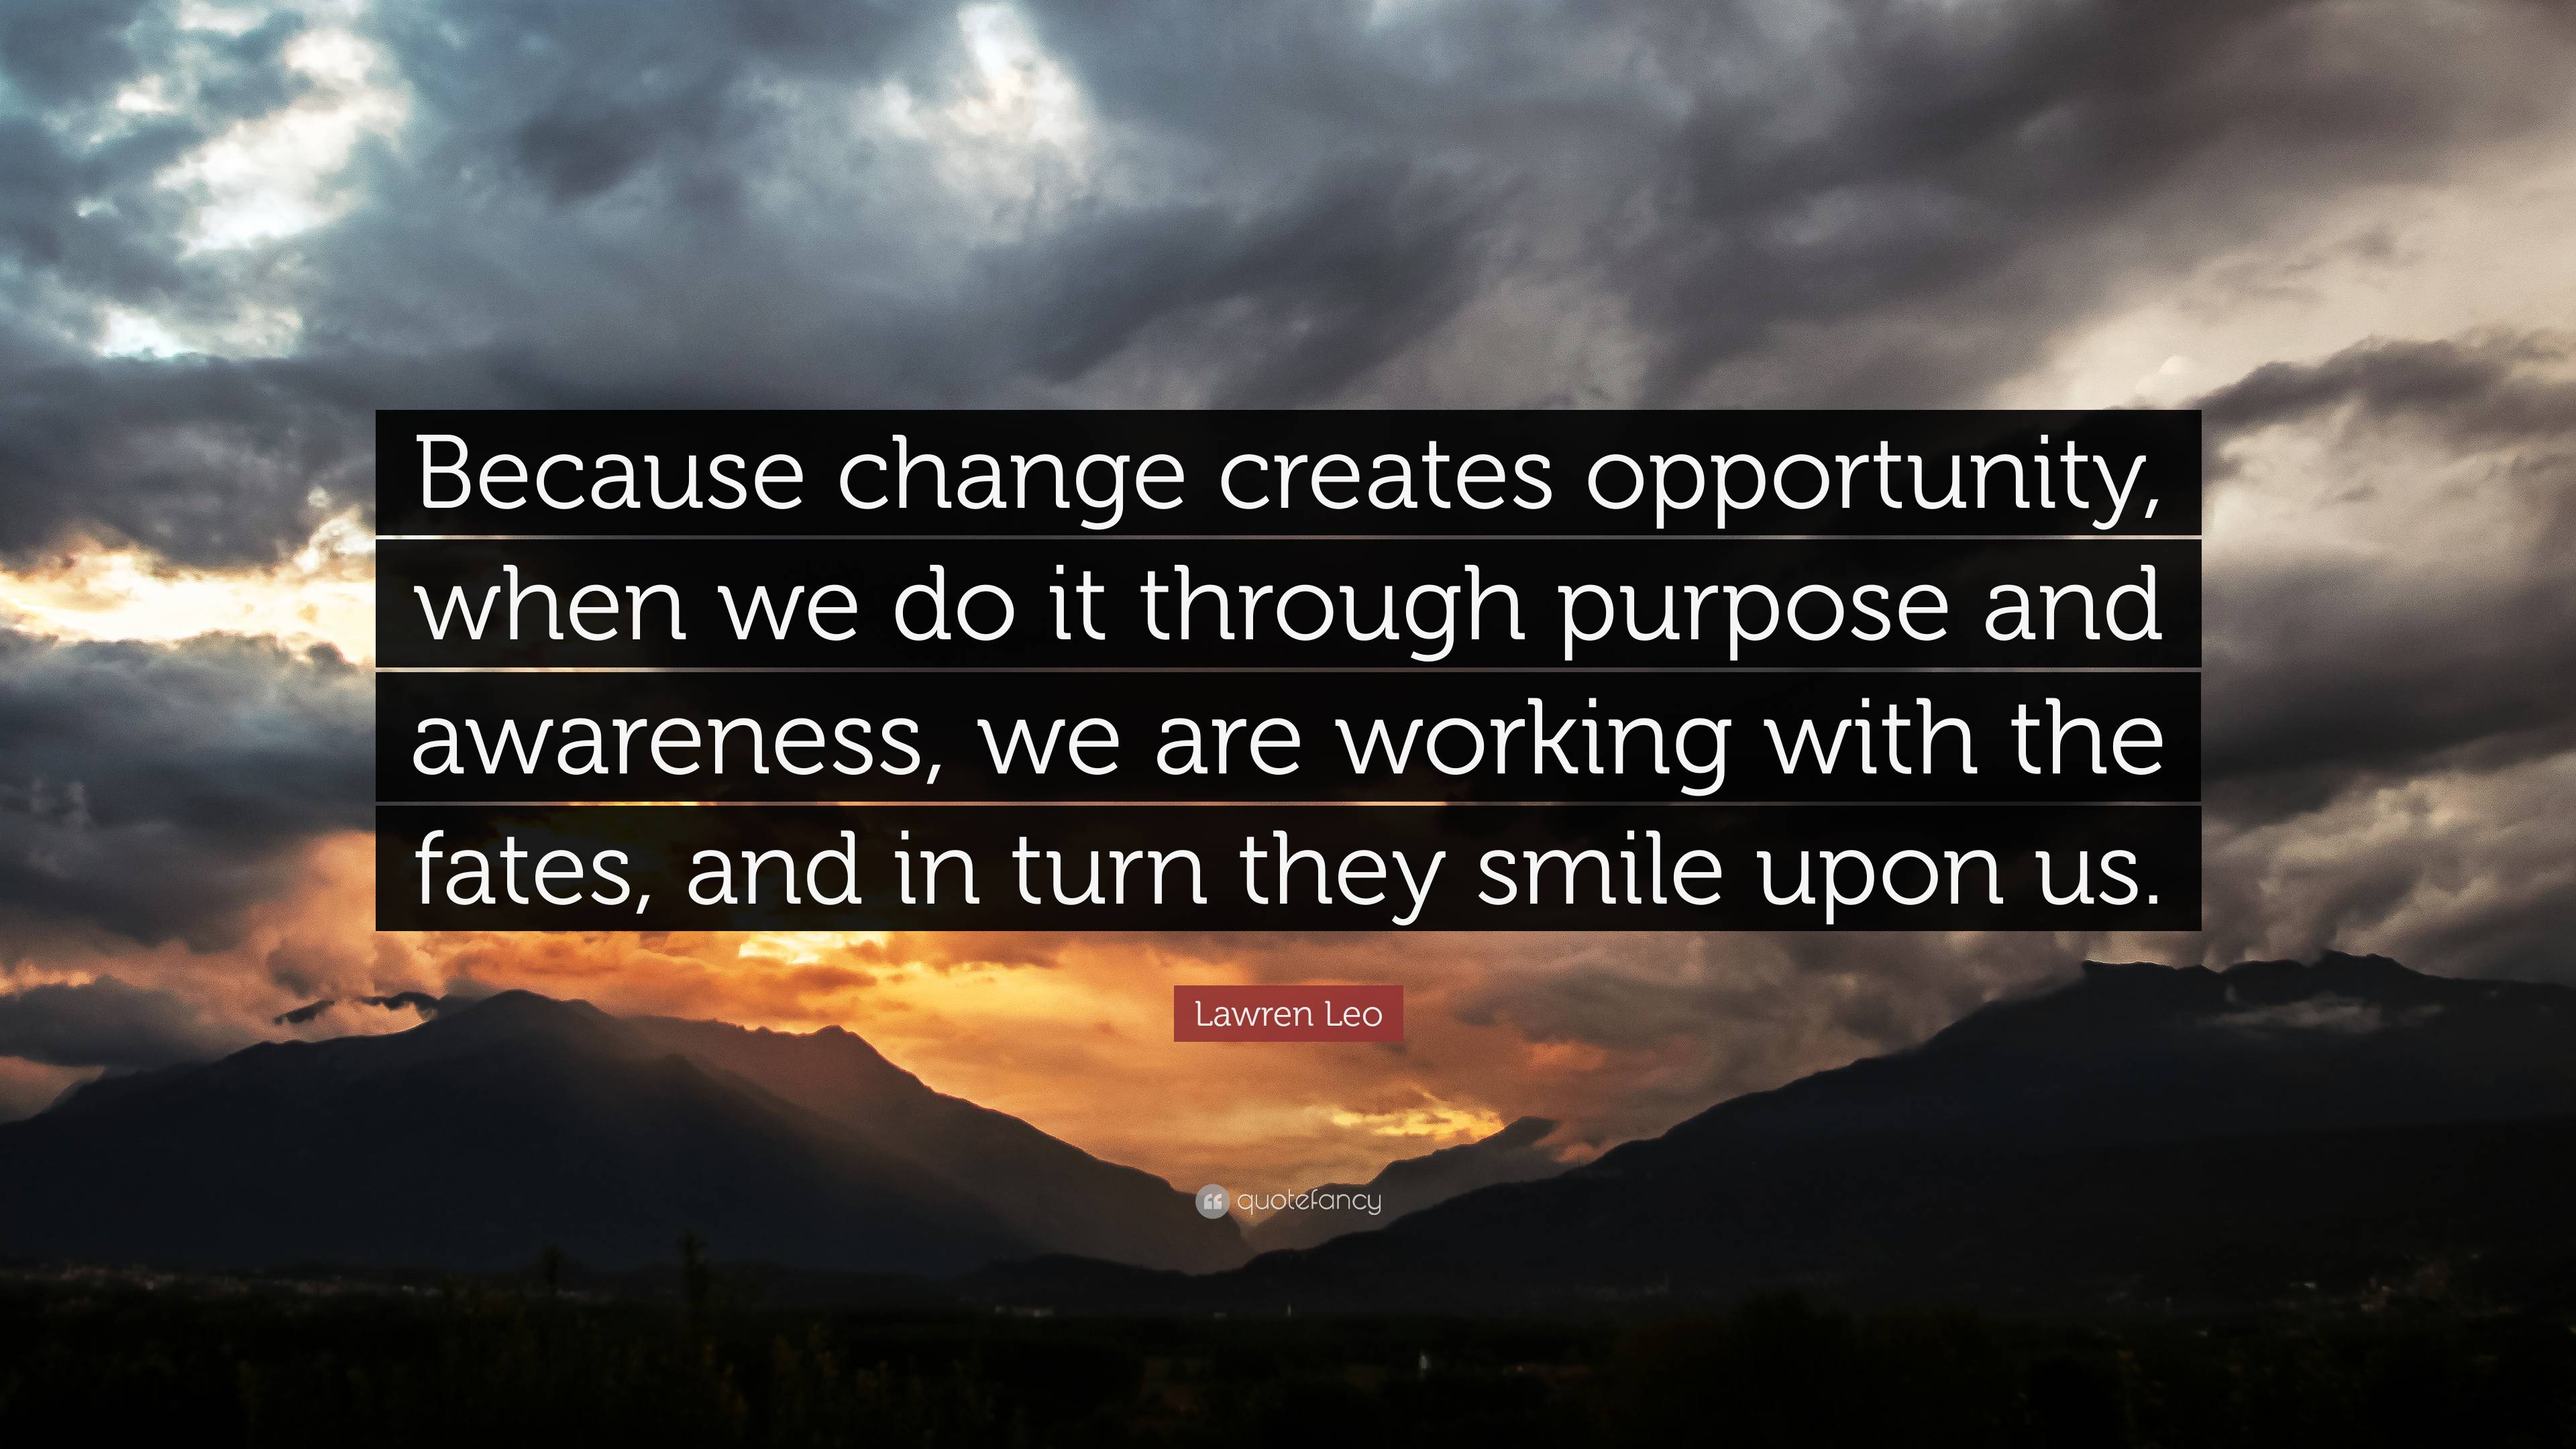 Lawren Leo Quote: “Because change creates opportunity, when we do it ...